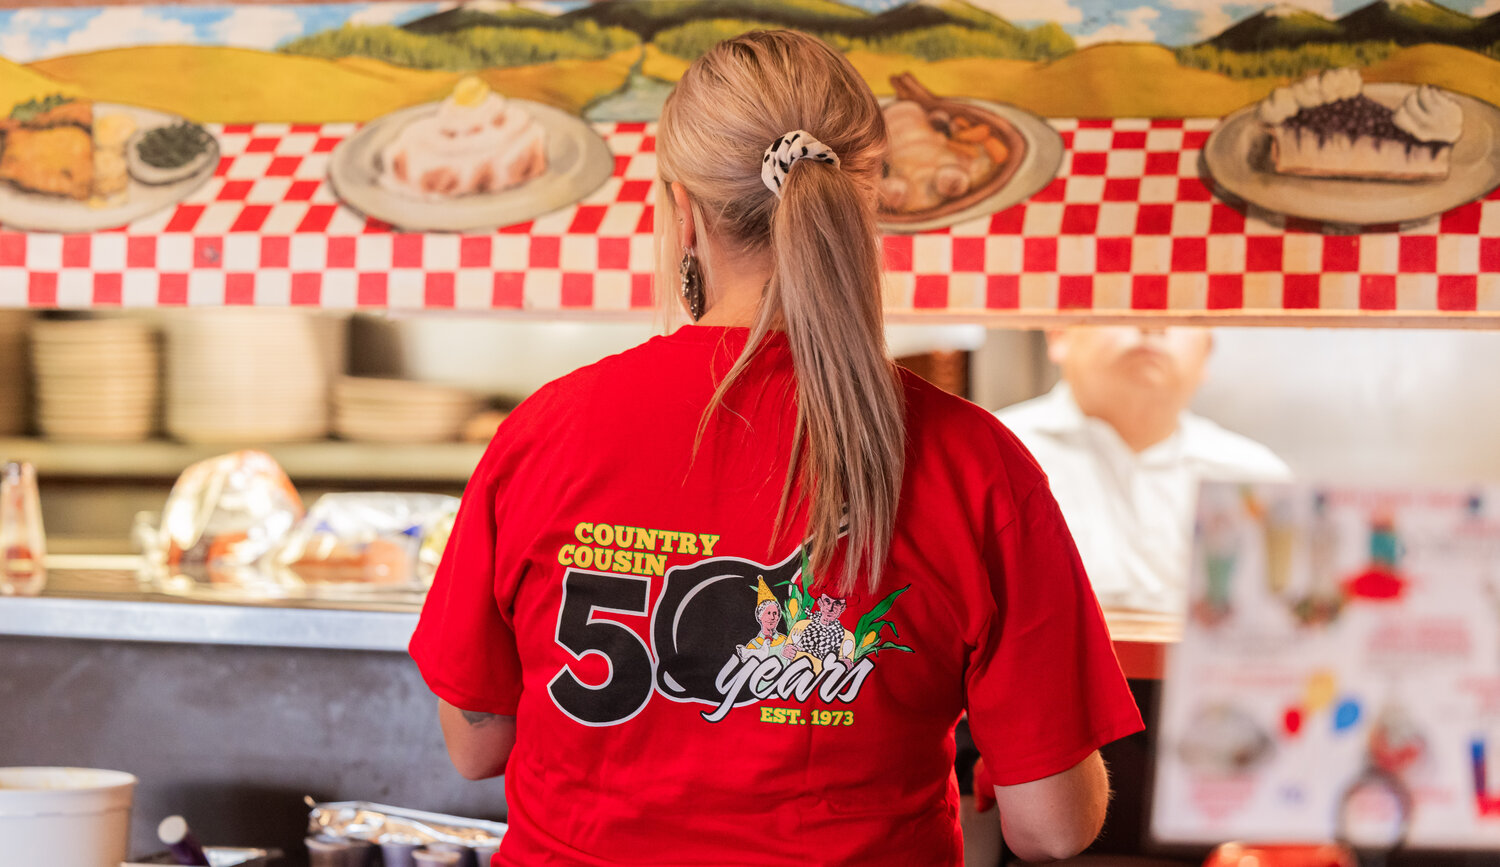 Country Cousin celebrates 50 years of business in the Centralia community.